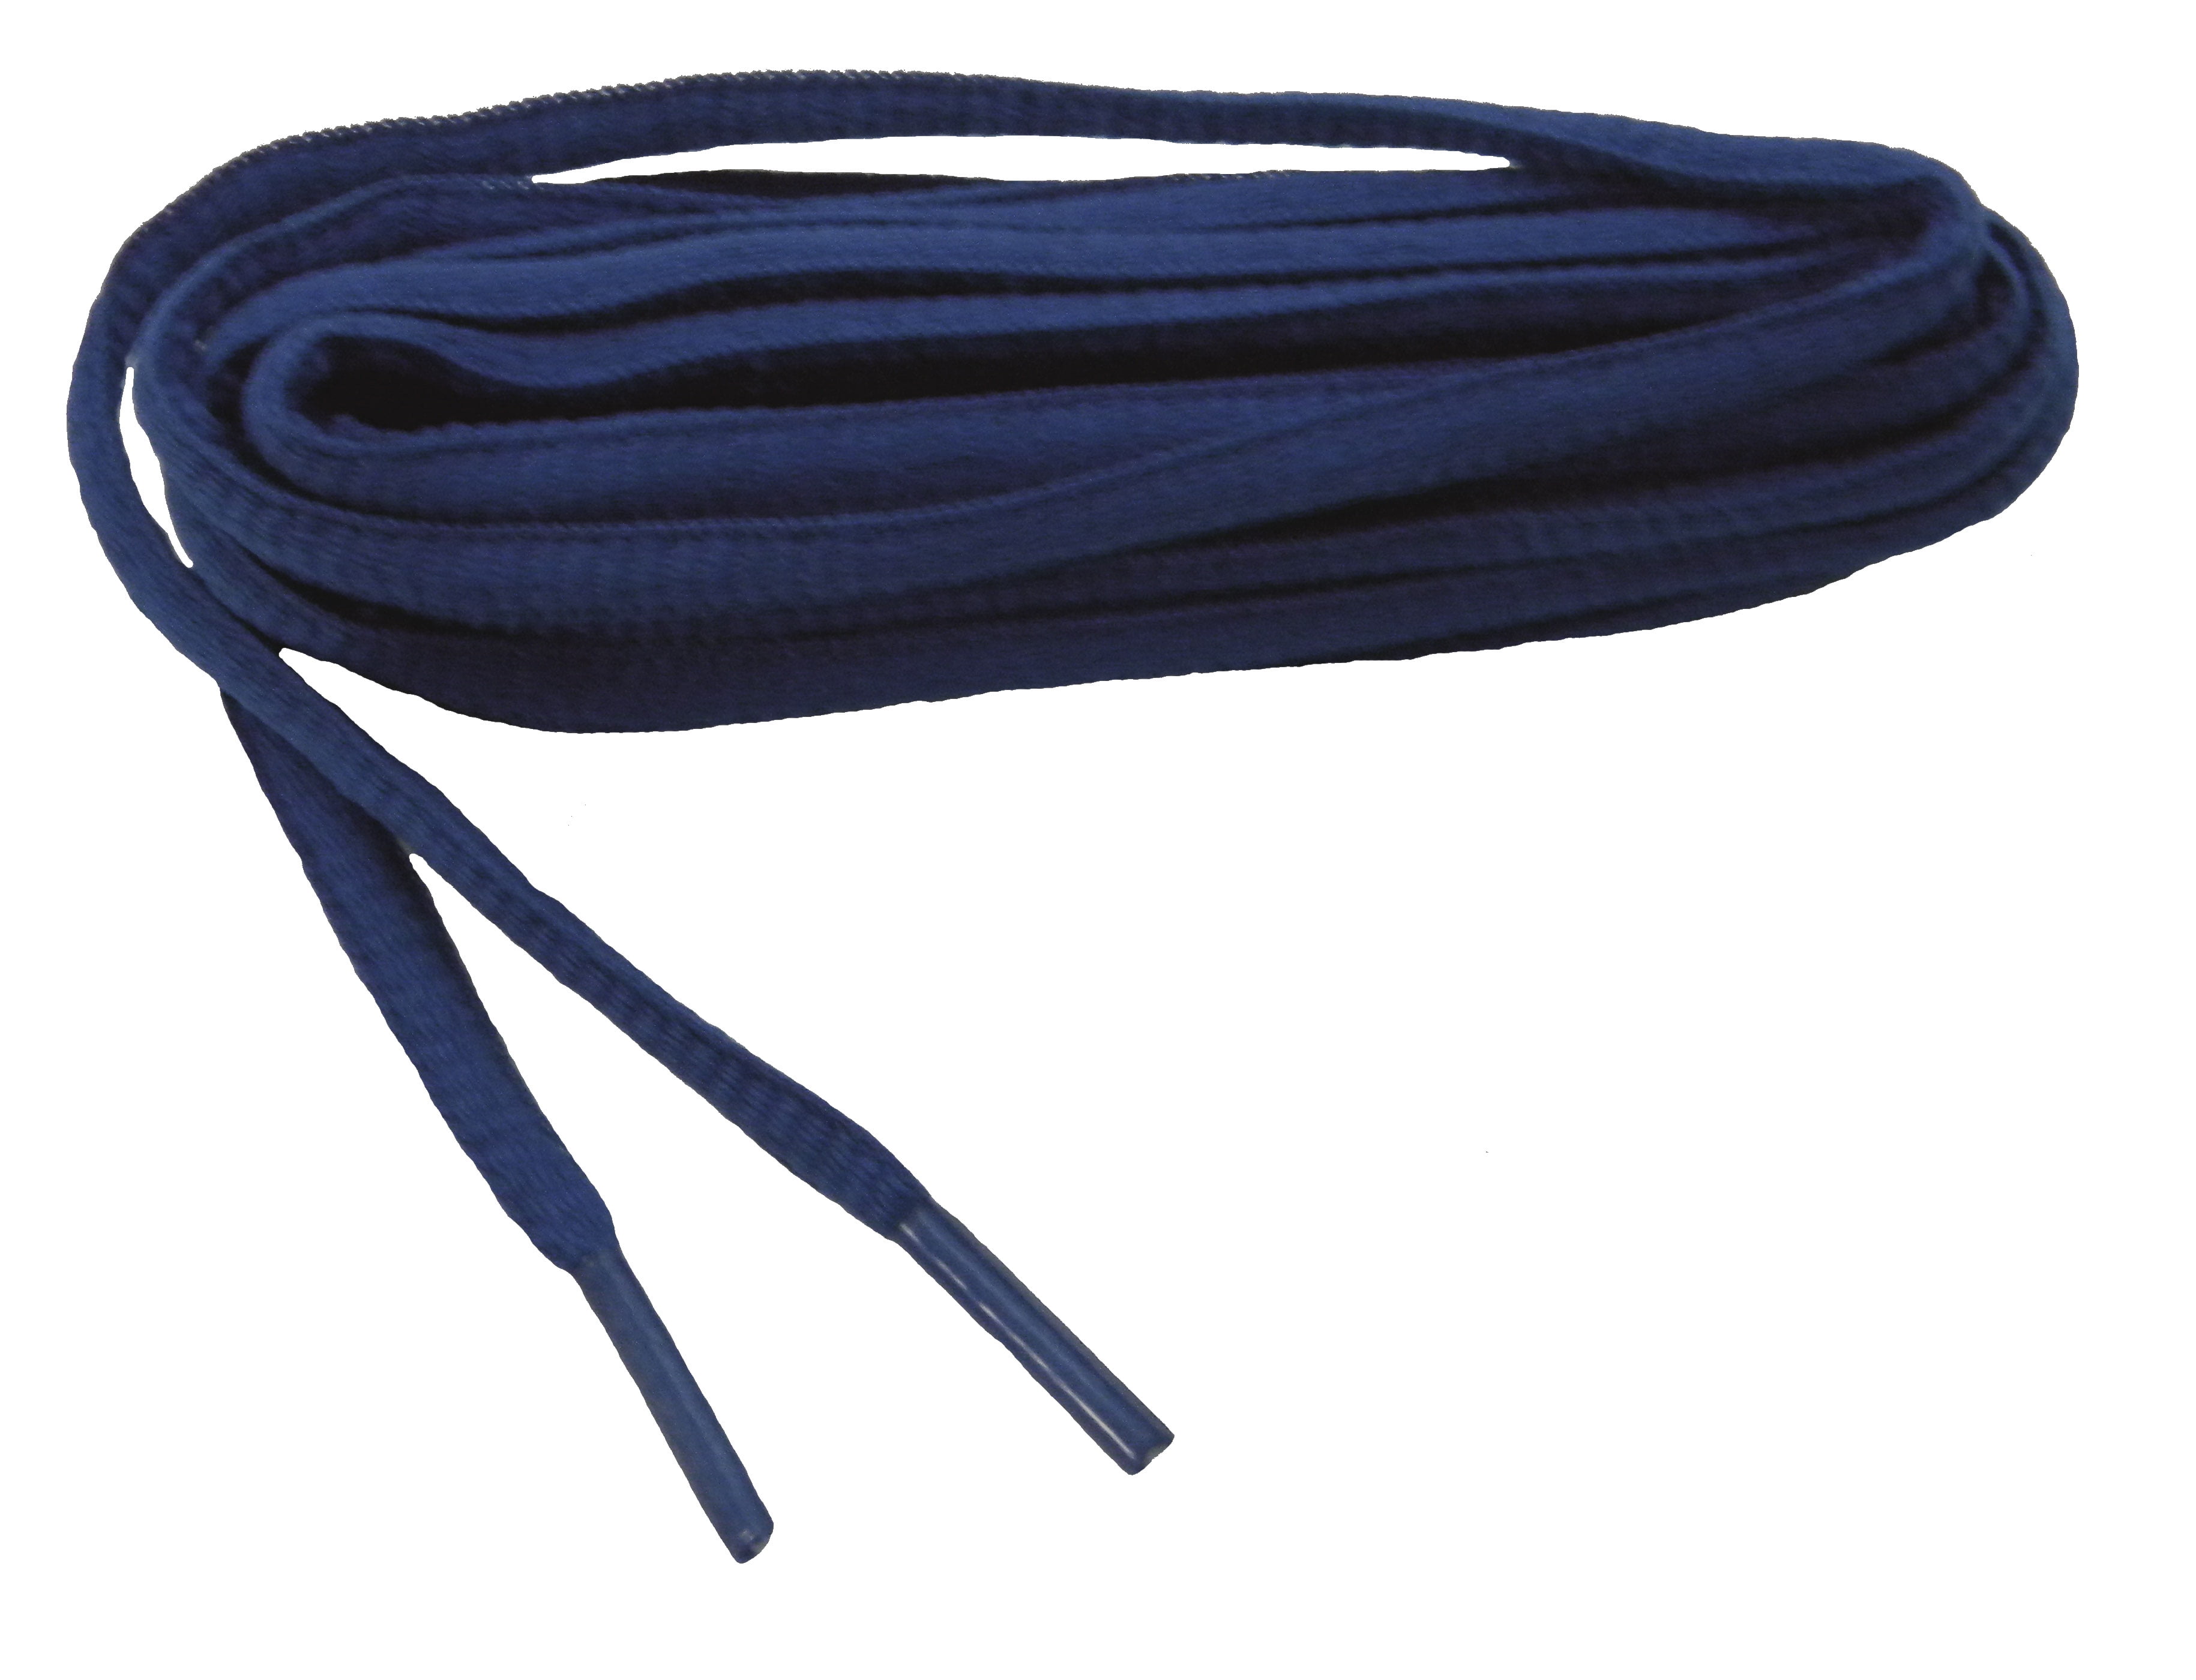 Athletic 54 Inch Black .Navy Burgundy Laces Cotton 3 Pair for $7.50 Made in USA